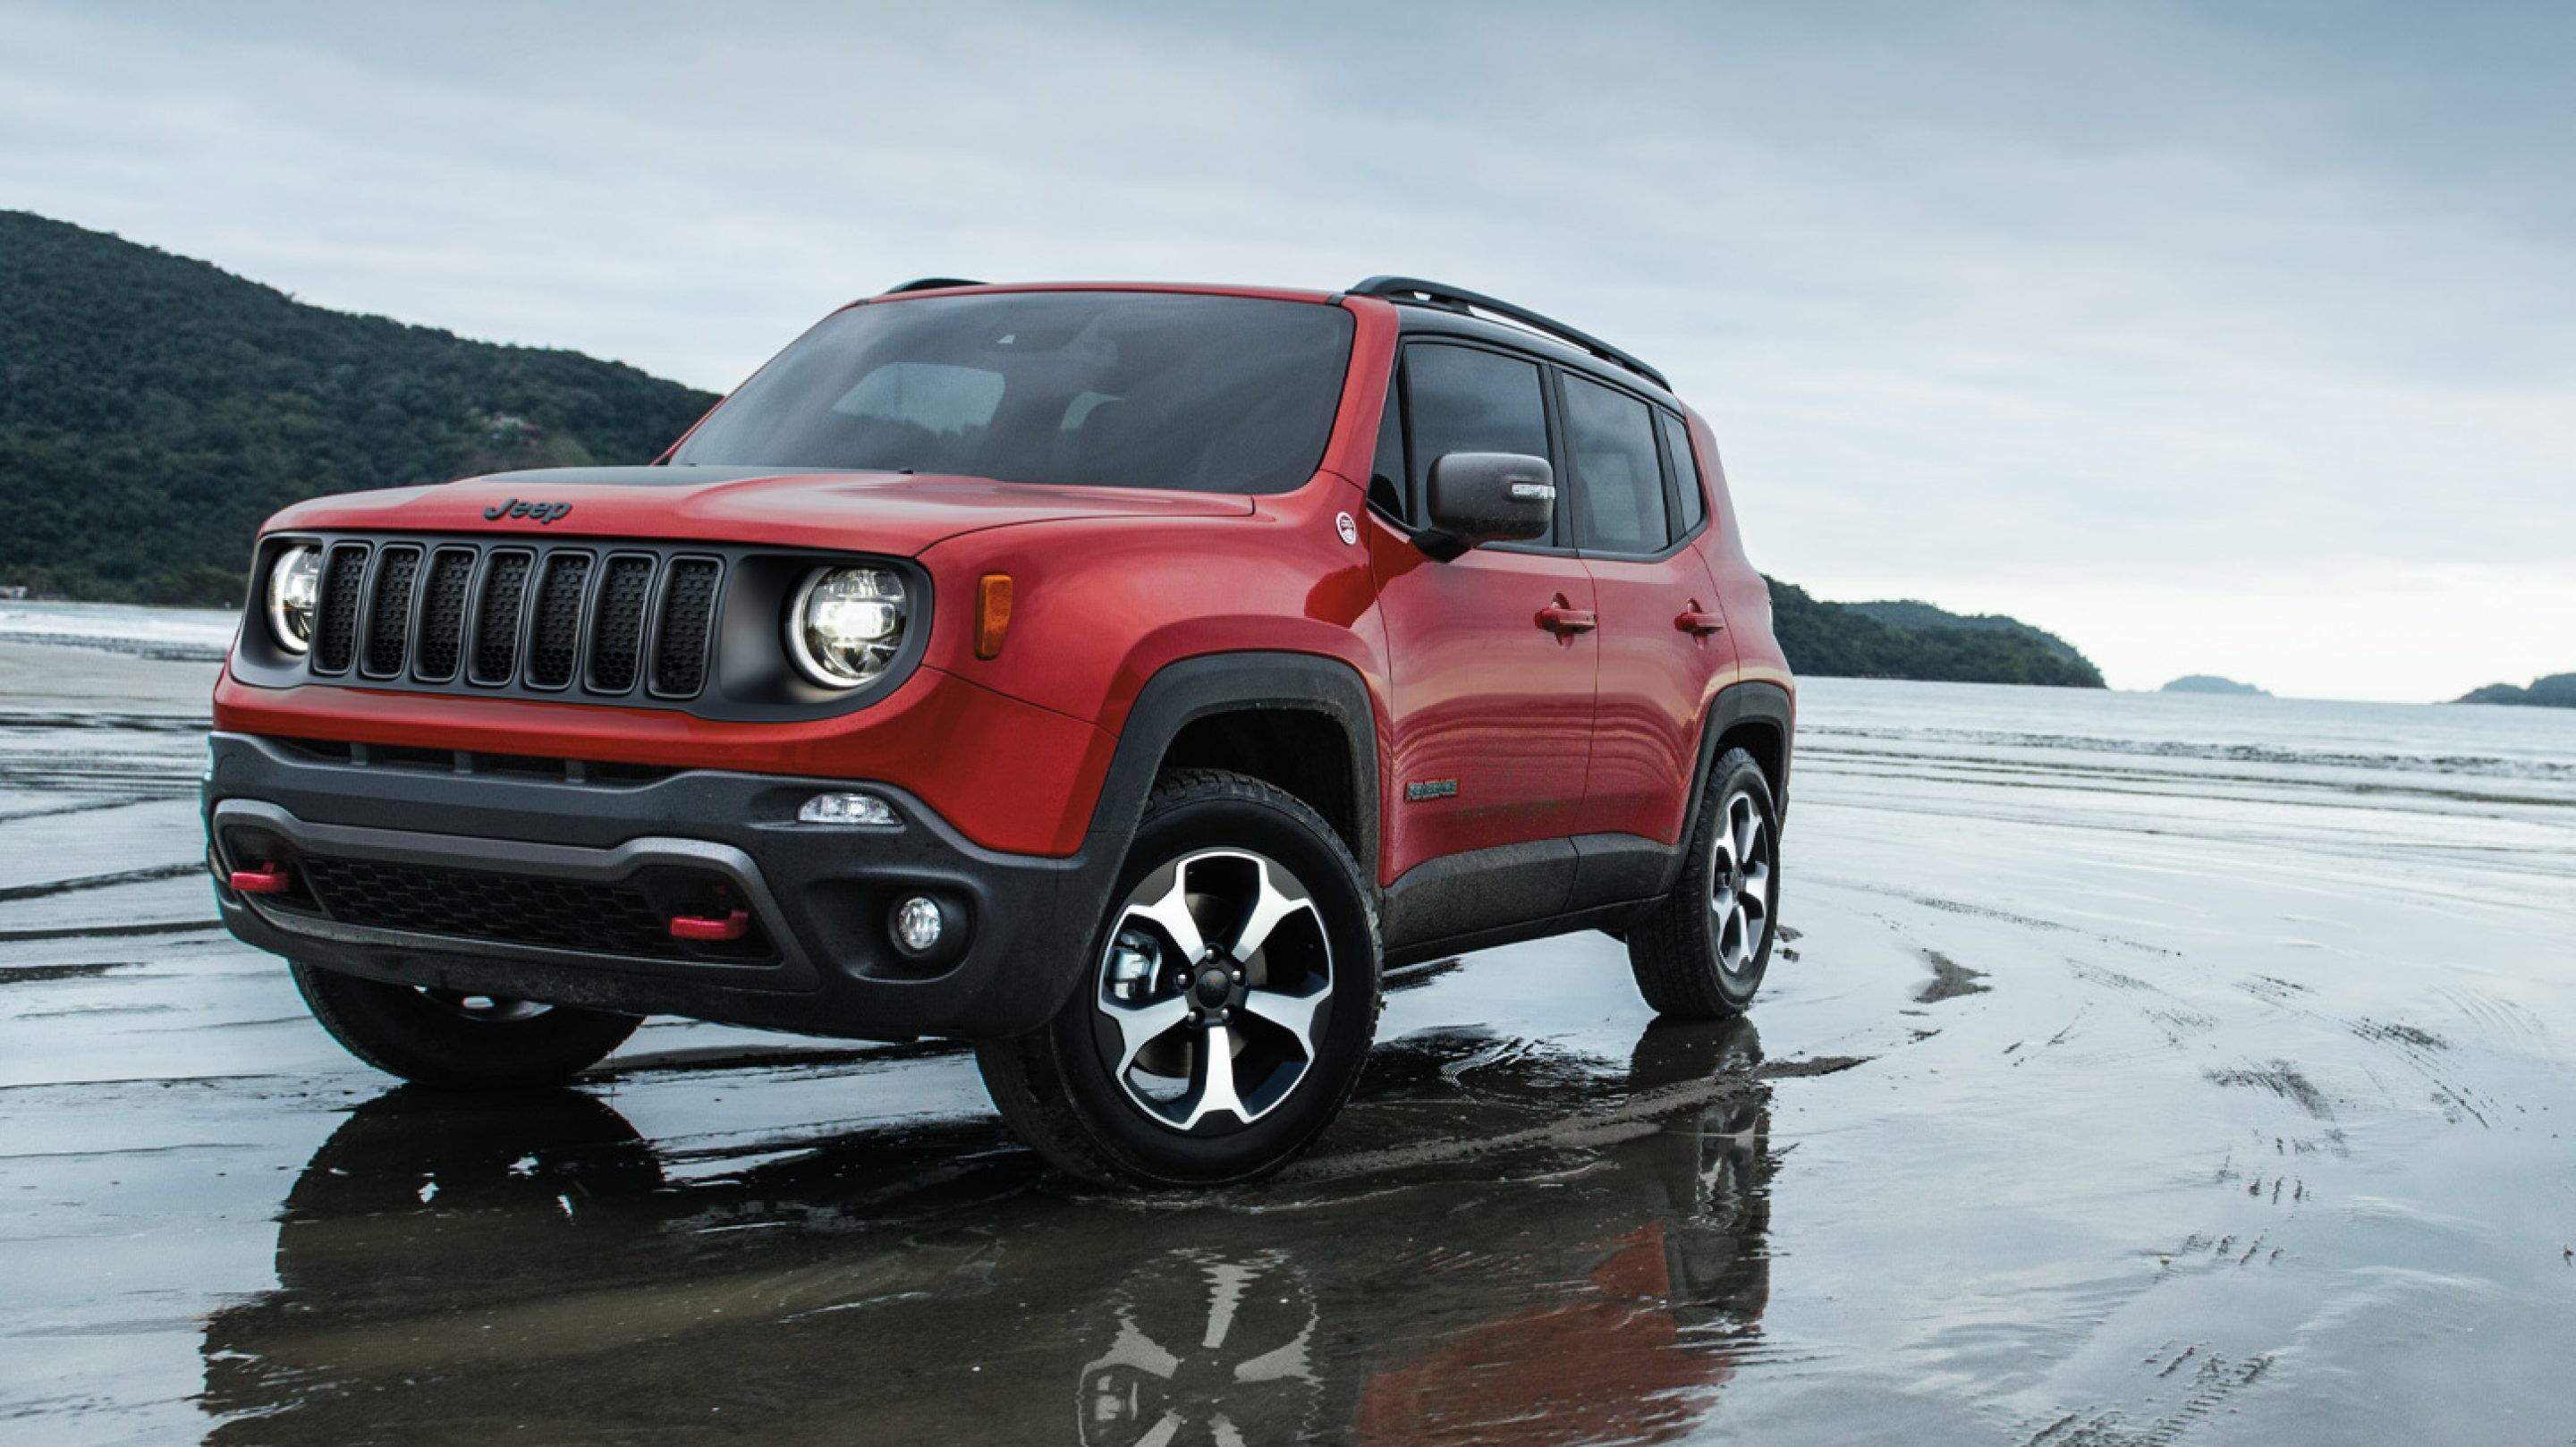 The Family Favorite 2021 Jeep Renegade  Southern Chrysler Dodge Jeep Ram  The Family Favorite 2021 Jeep Renegade